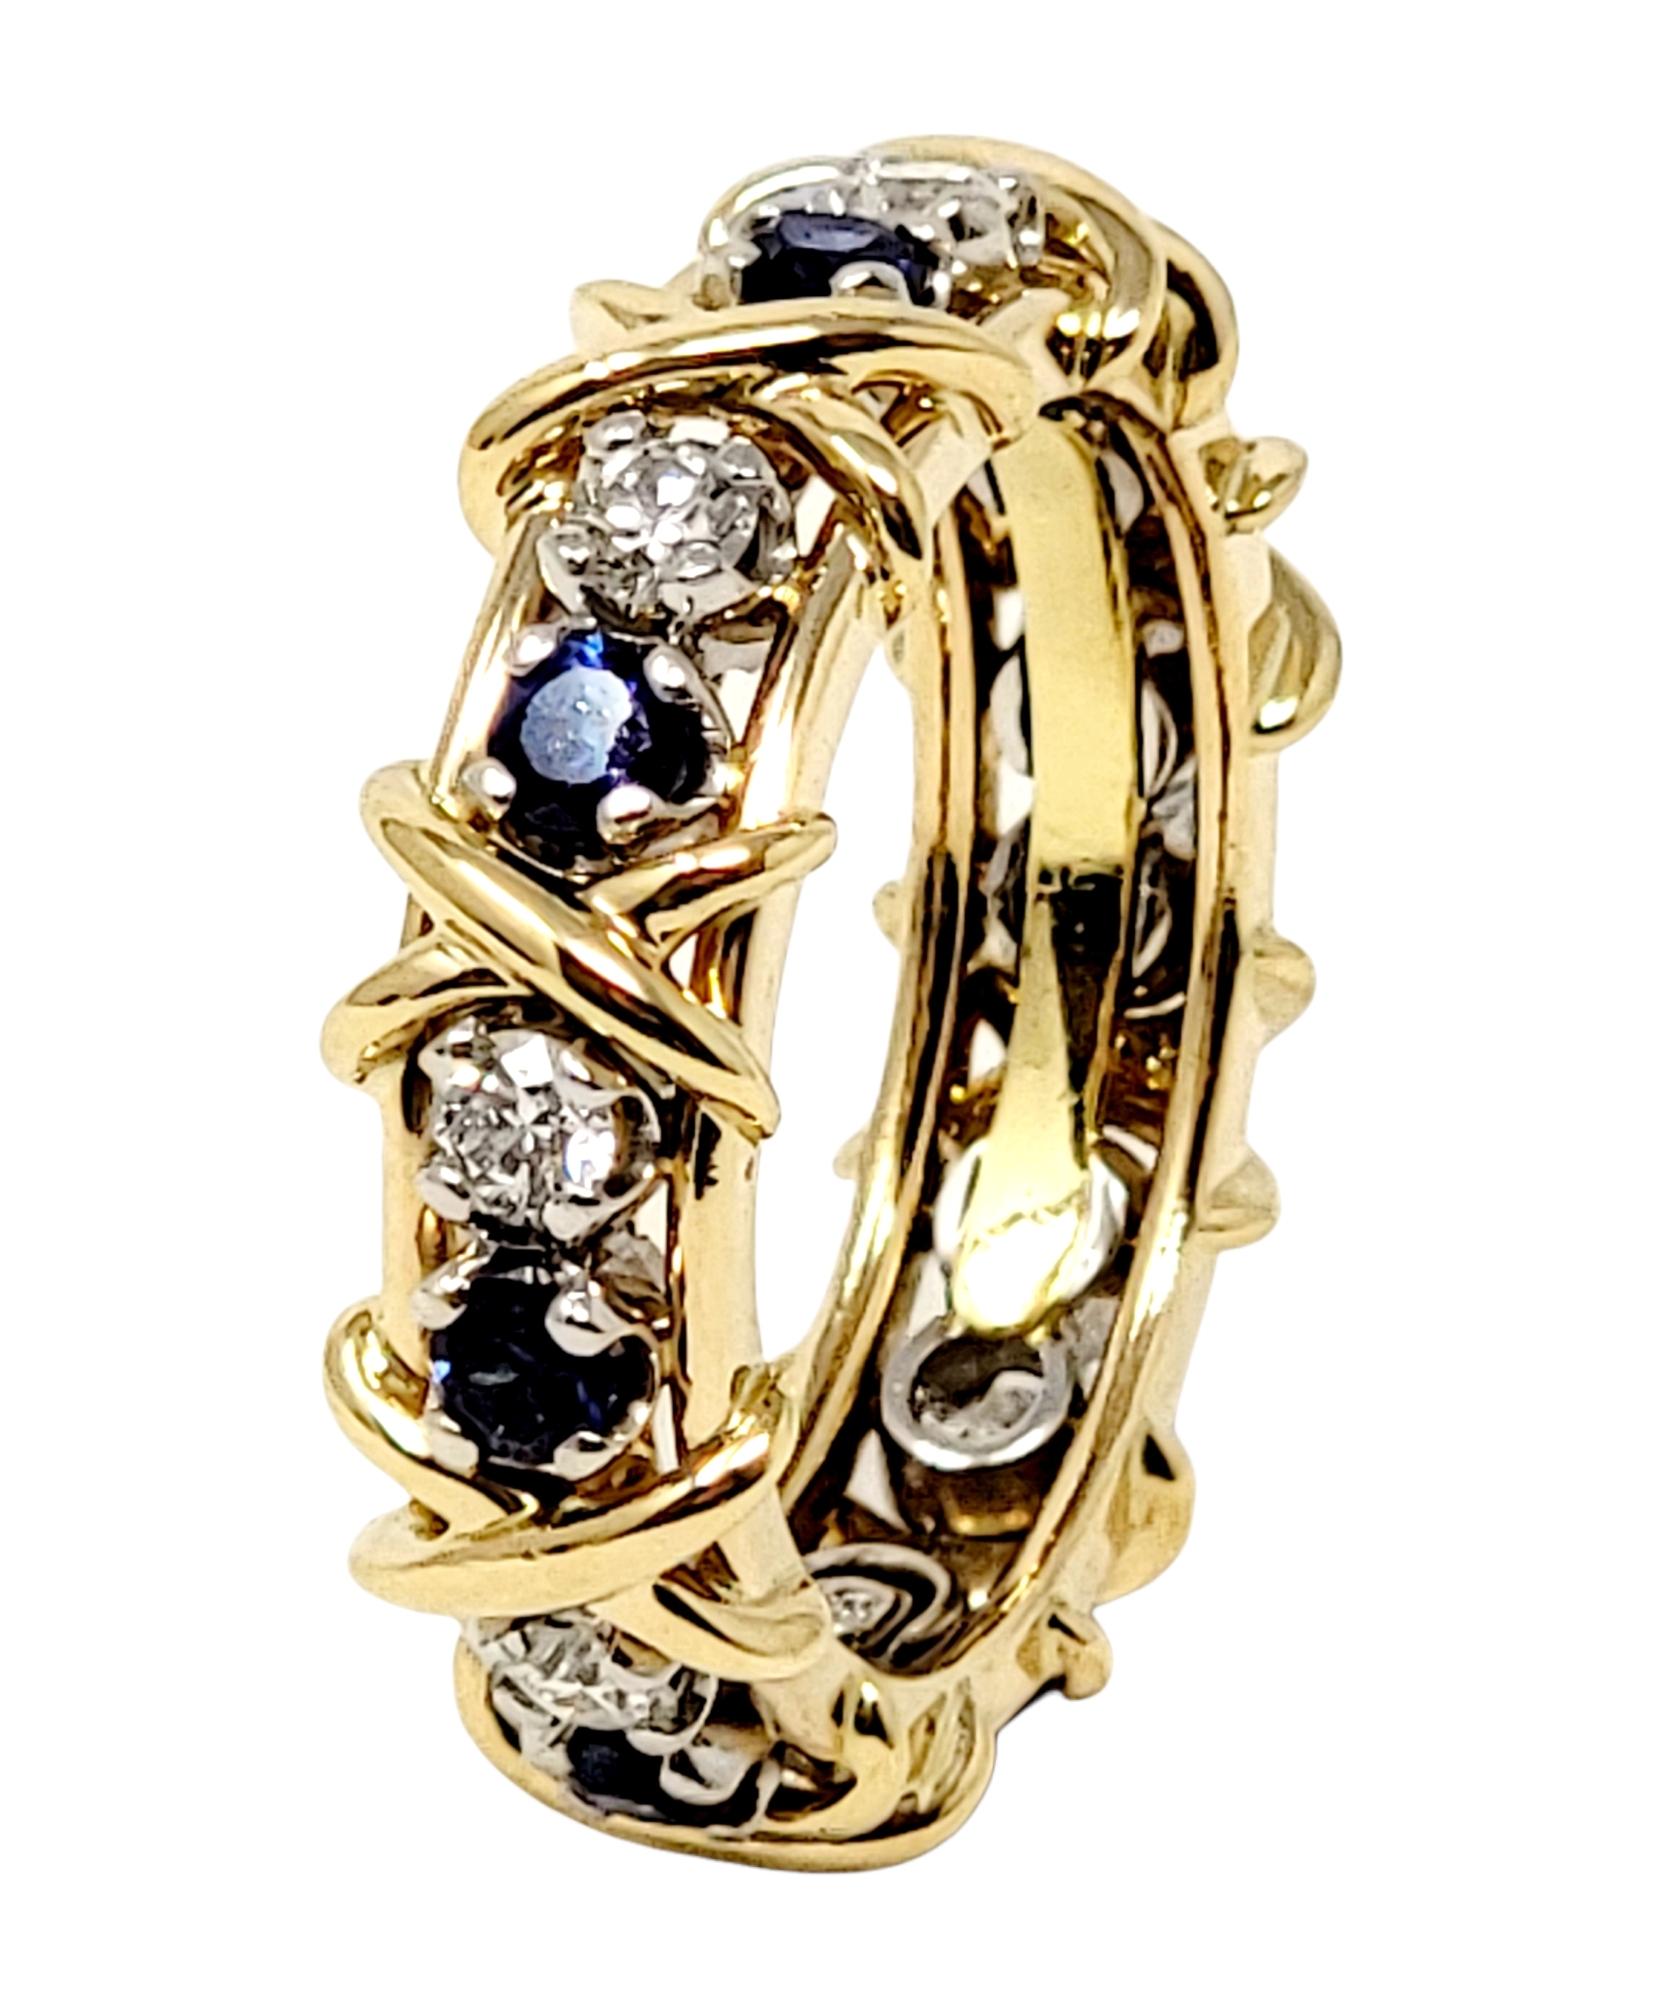 Jean Schlumberger for Tiffany & Co. Diamond and Sapphire Sixteen-Stone 2